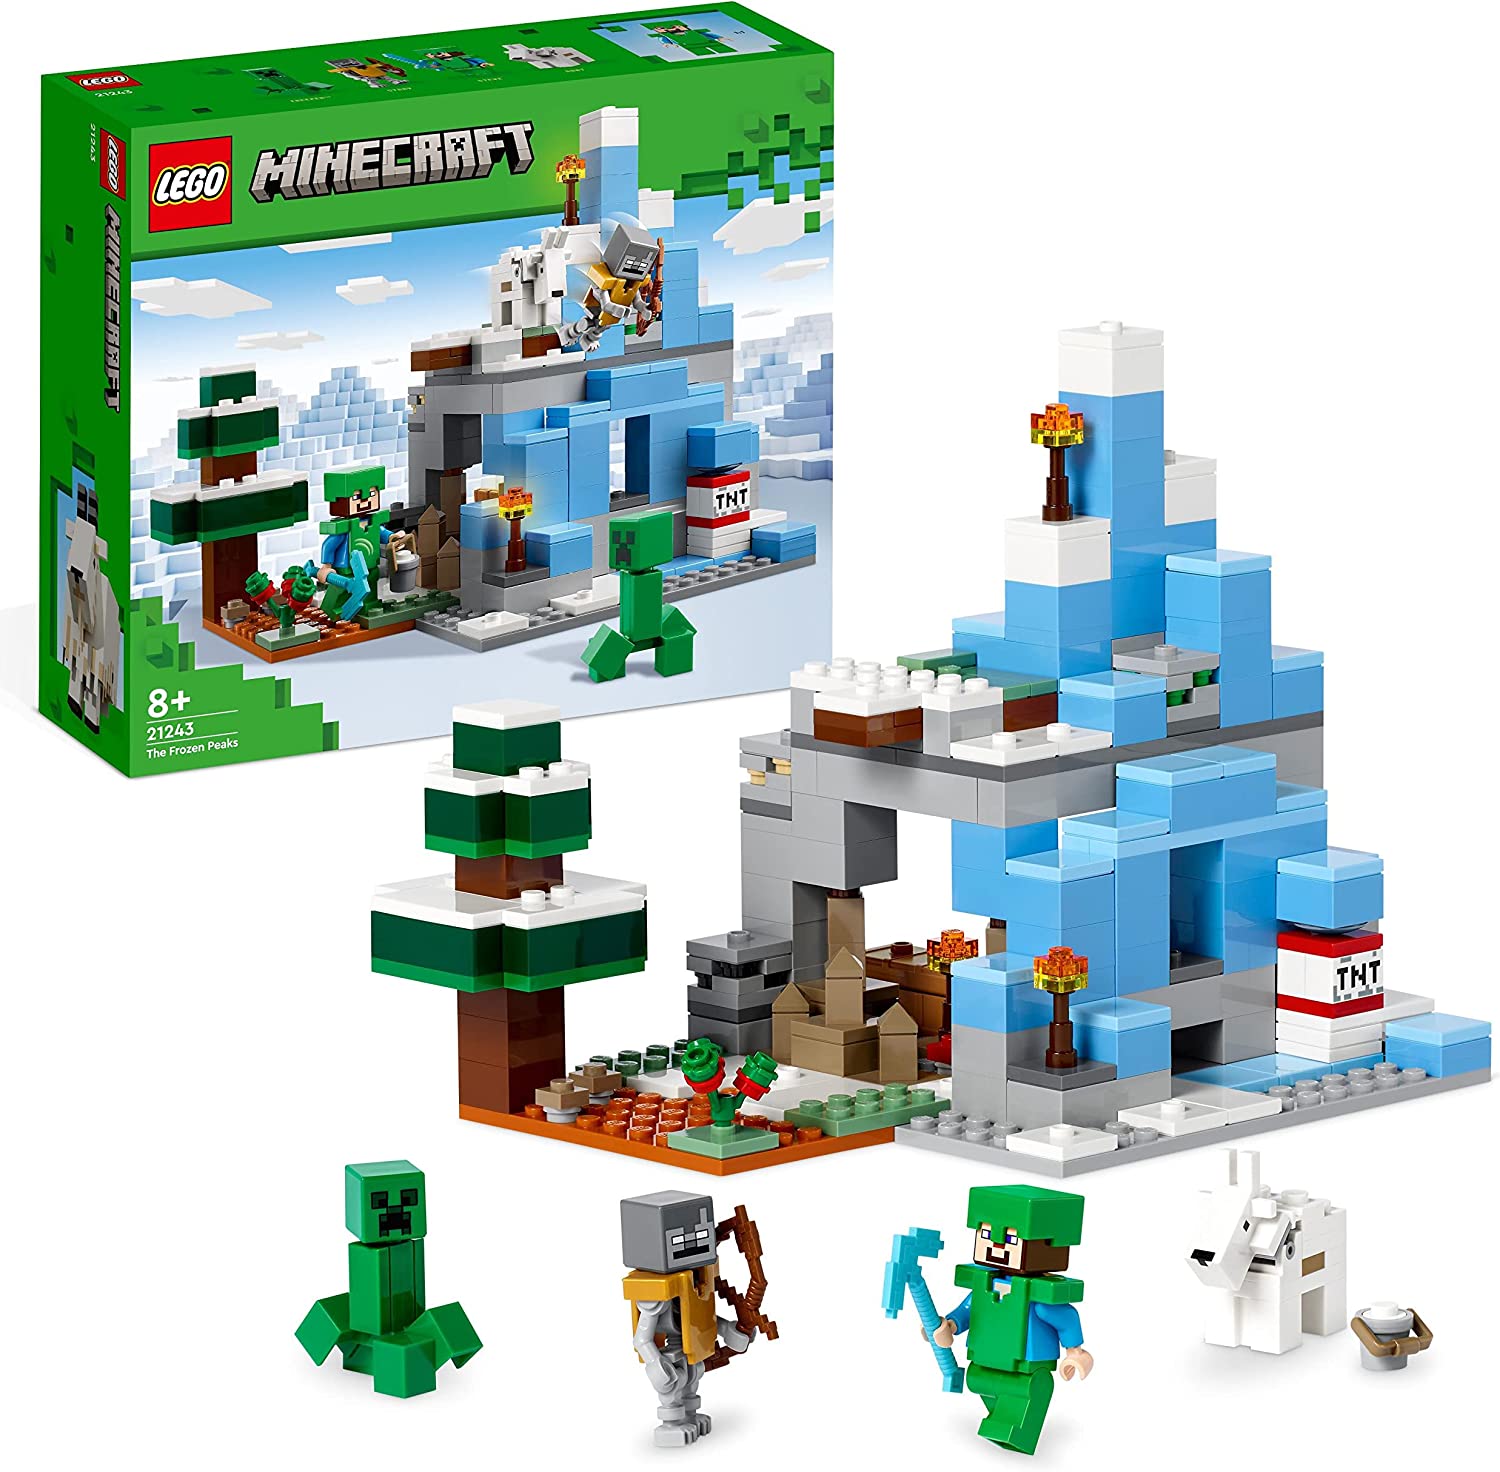 LEGO 21243 Minecraft The Iced Summit Set with Steve, Creeper and Goat Figures, Icy Biom and Cave, Video Game, Toy with Accessories